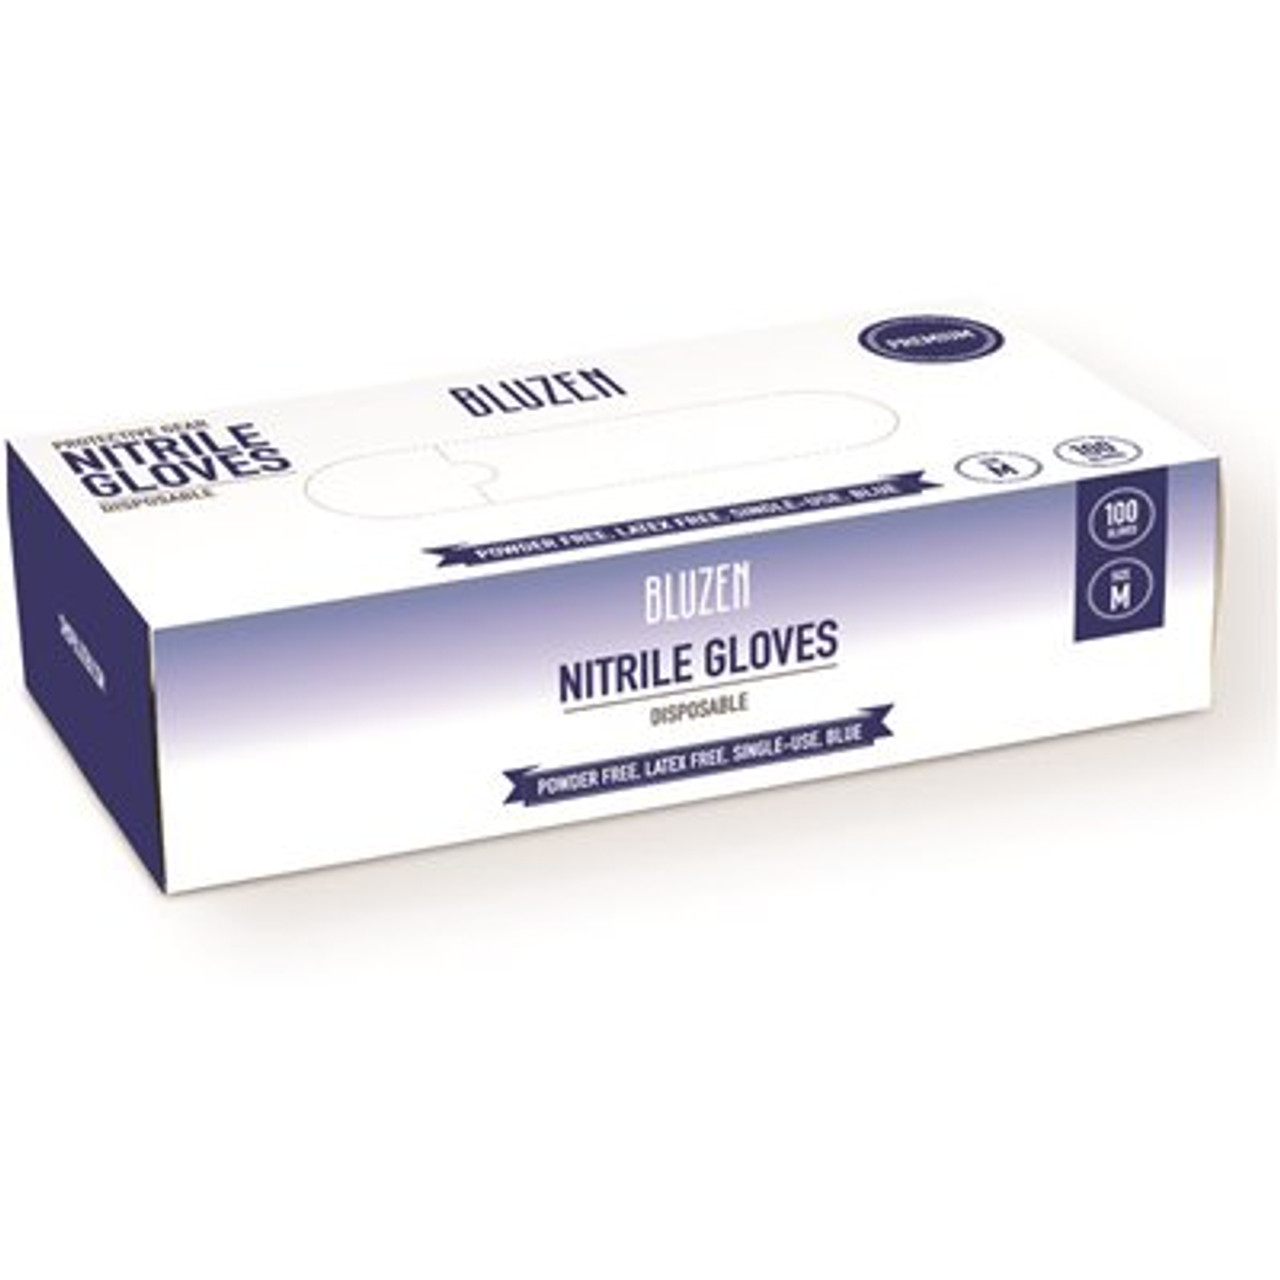 SAFETY WERCS Small Black Industrial 4mil Nitrile Gloves 1000-Count Case